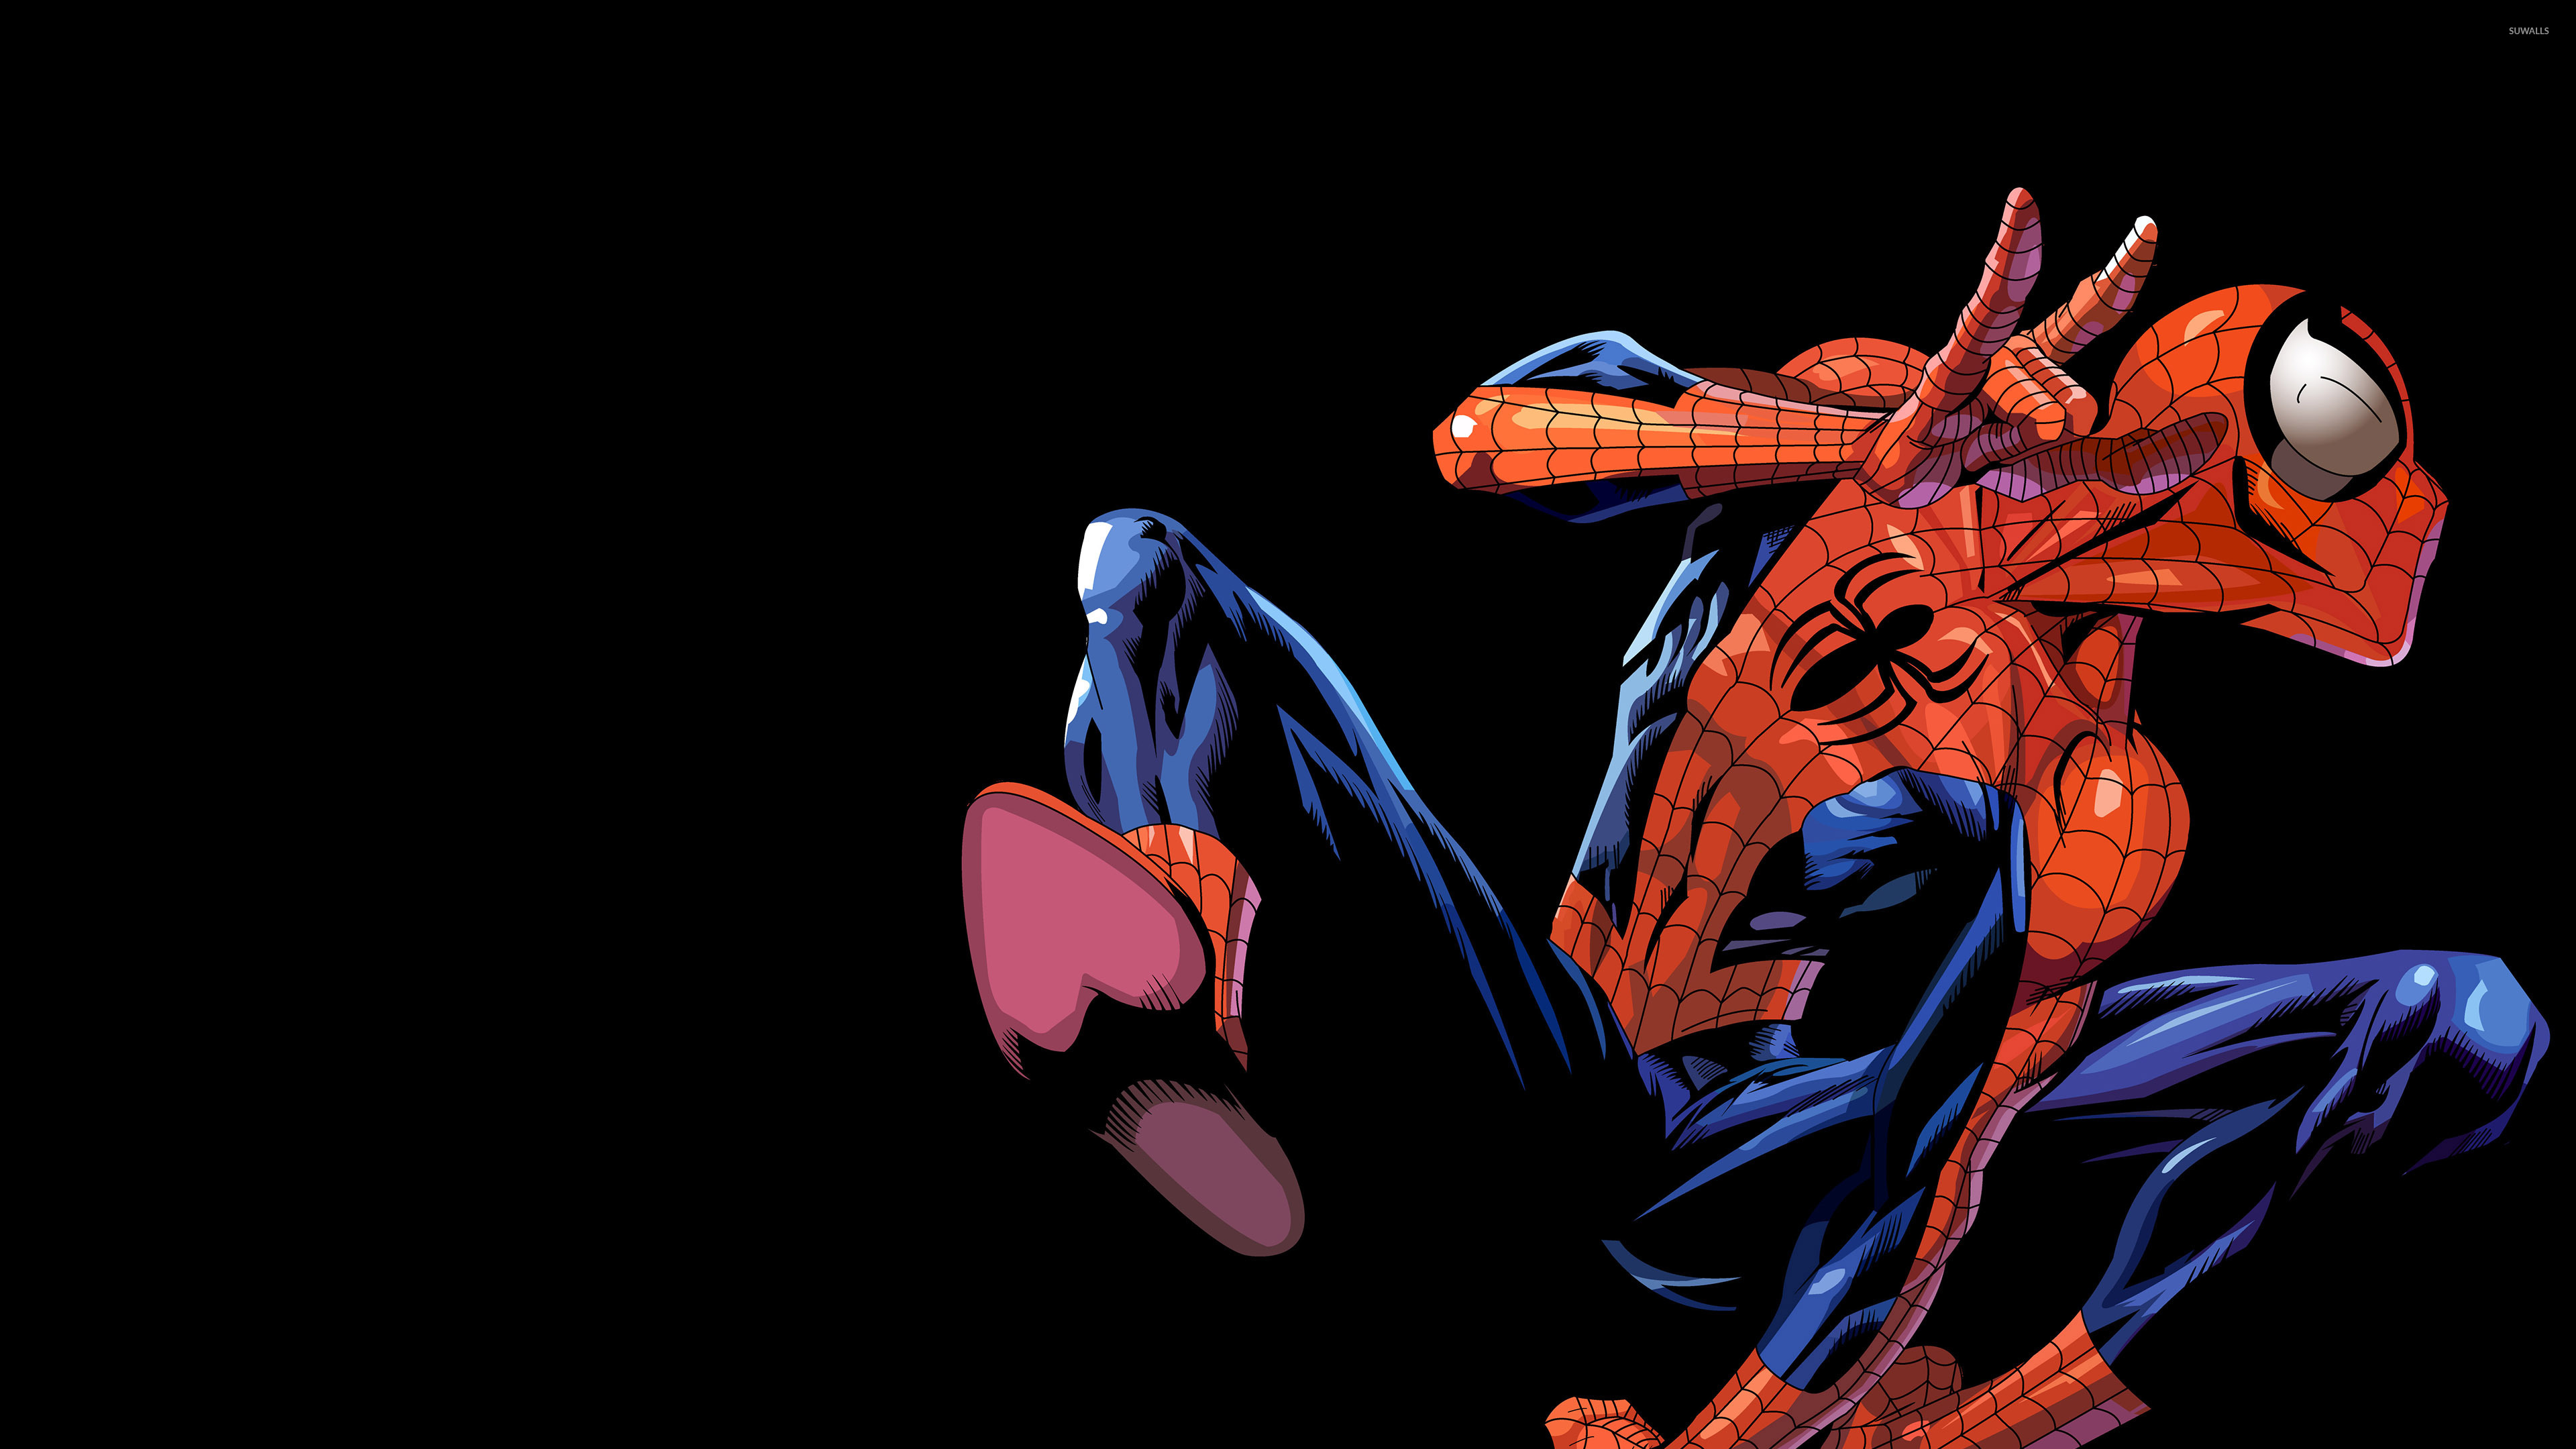 Spider Man in the air wallpaper   Comic wallpapers   50882